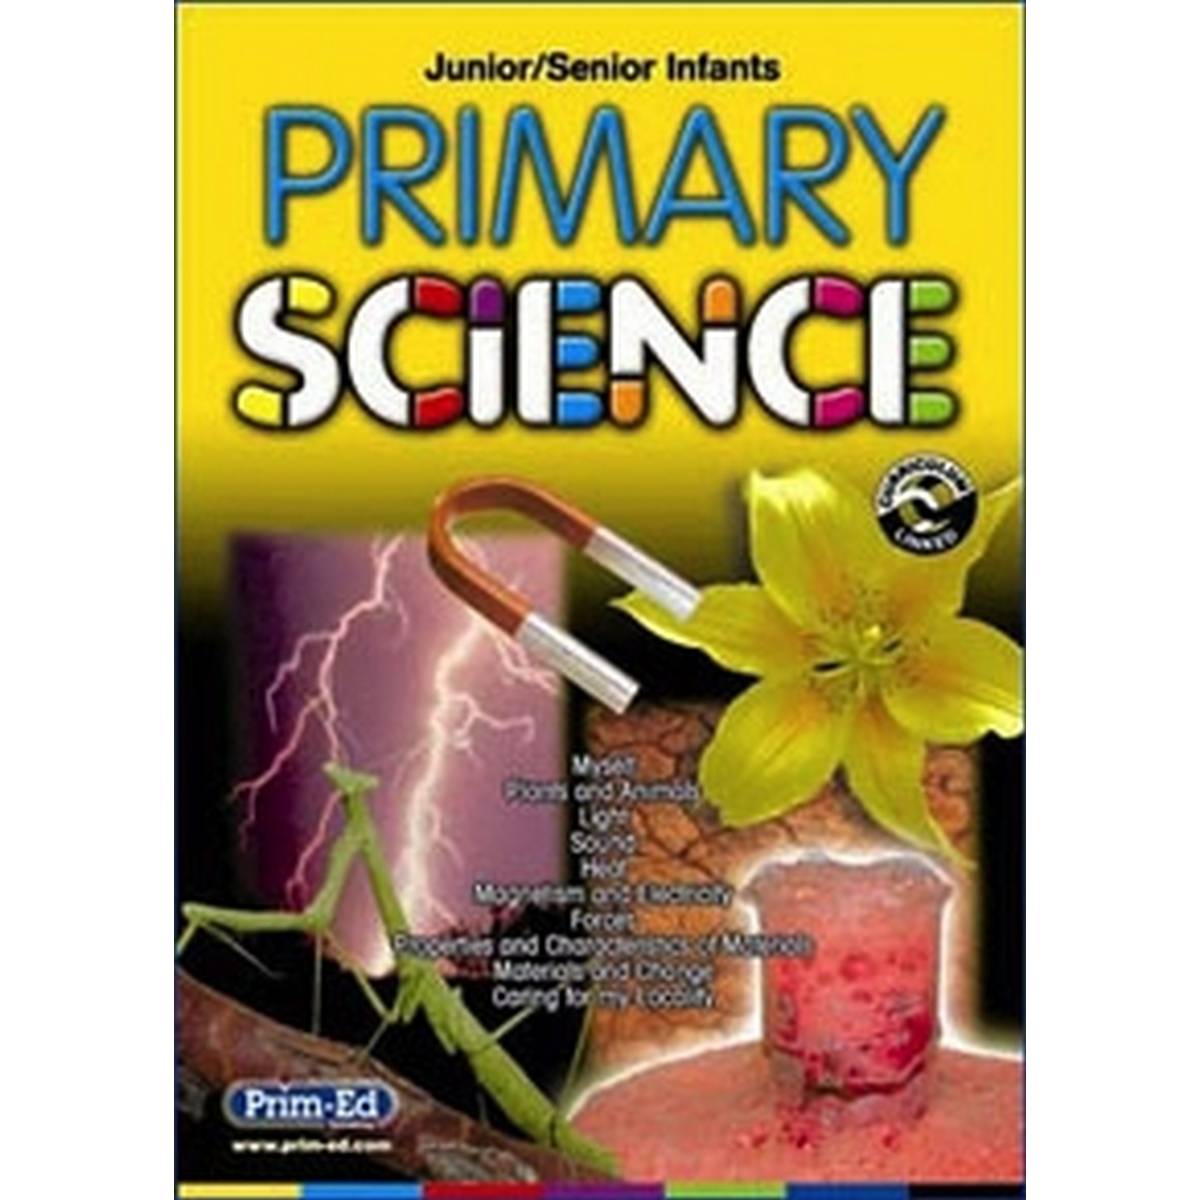 Primary Science 1st/2nd Class